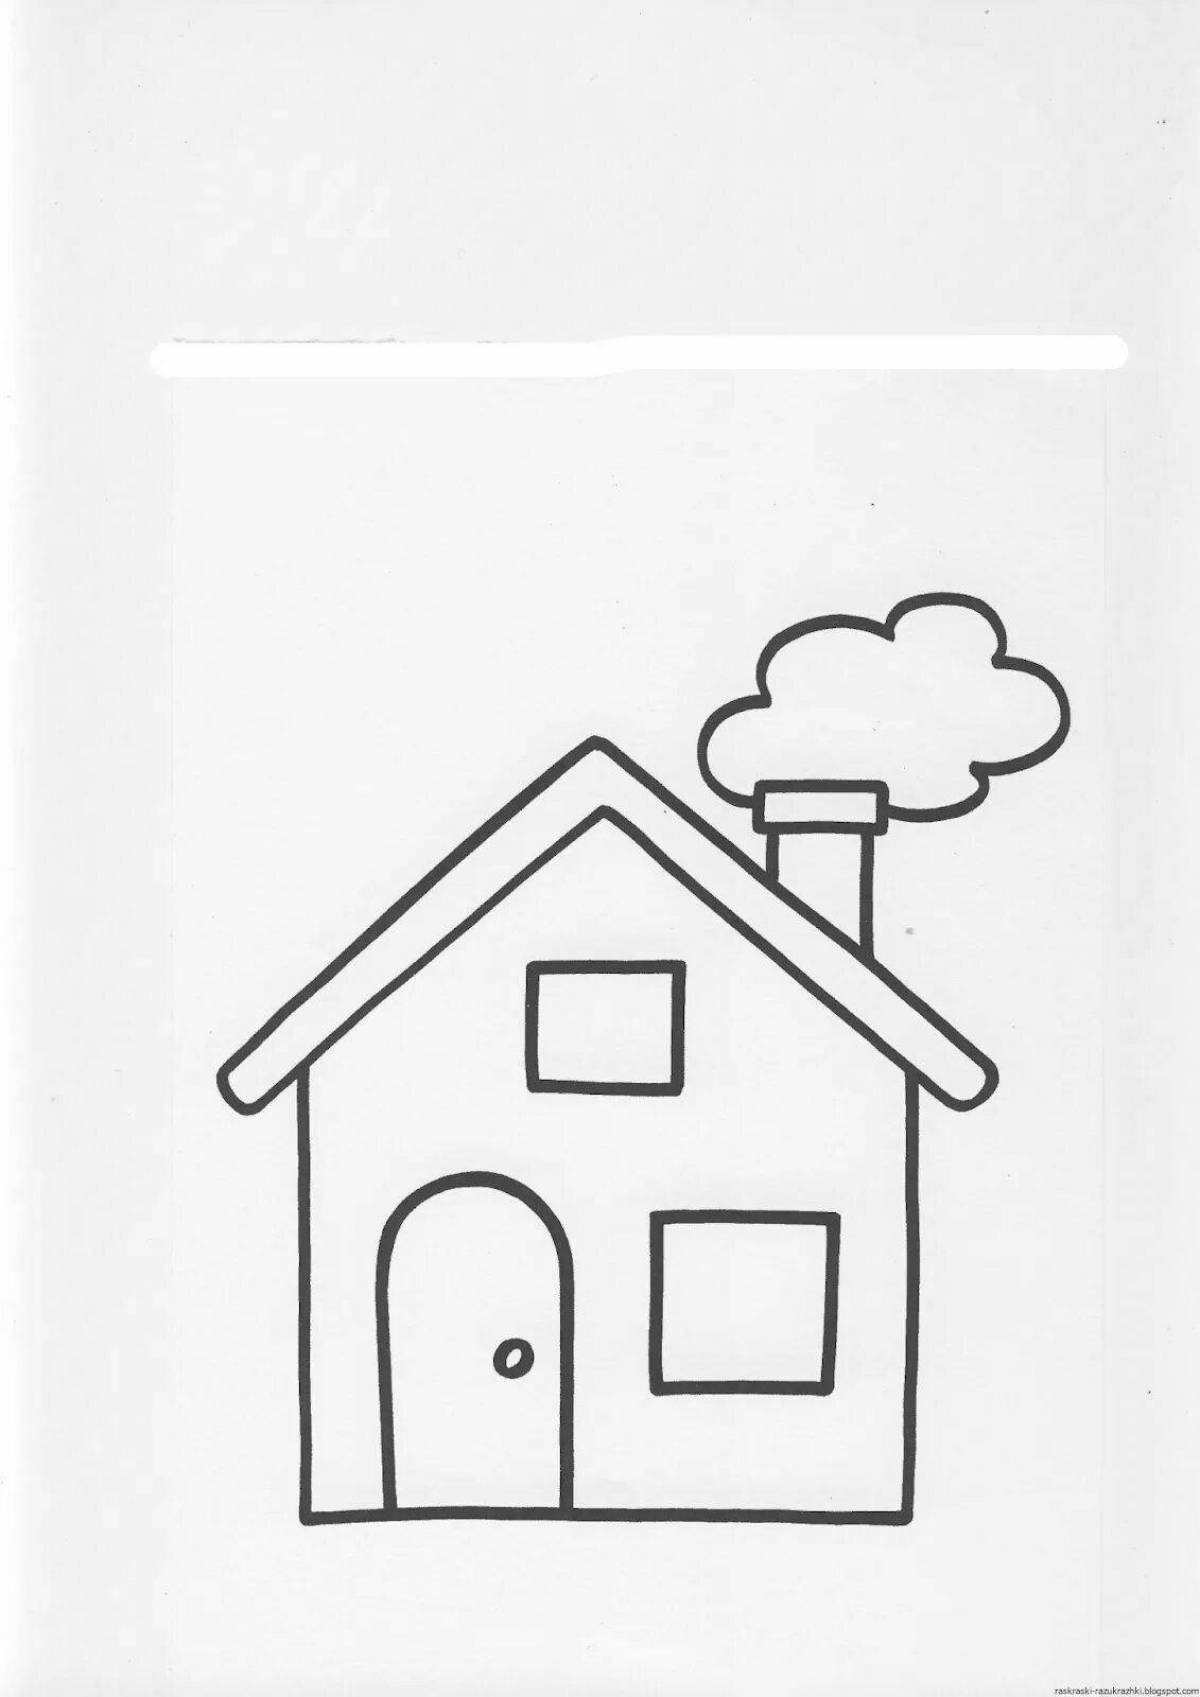 Impeccable house coloring page